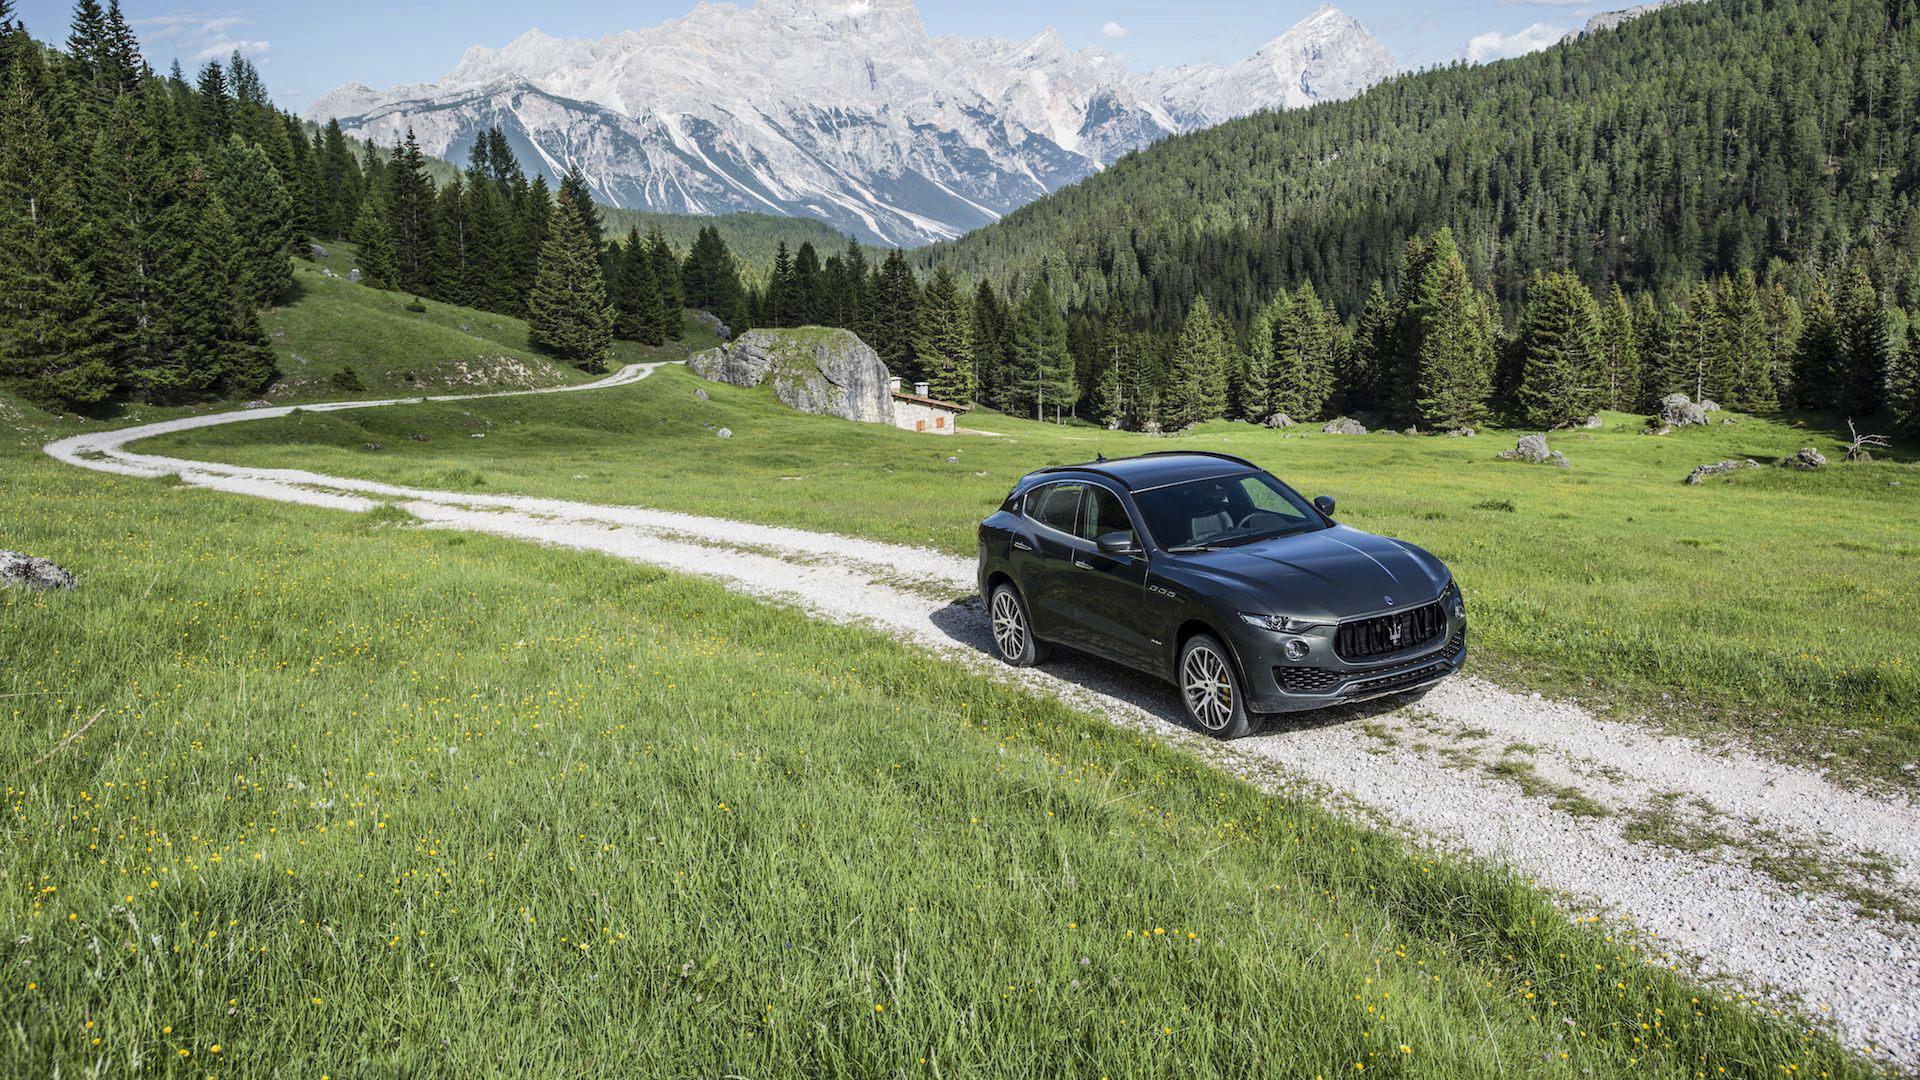 Maserati Levante driving in a mountains landscape - air suspension technology